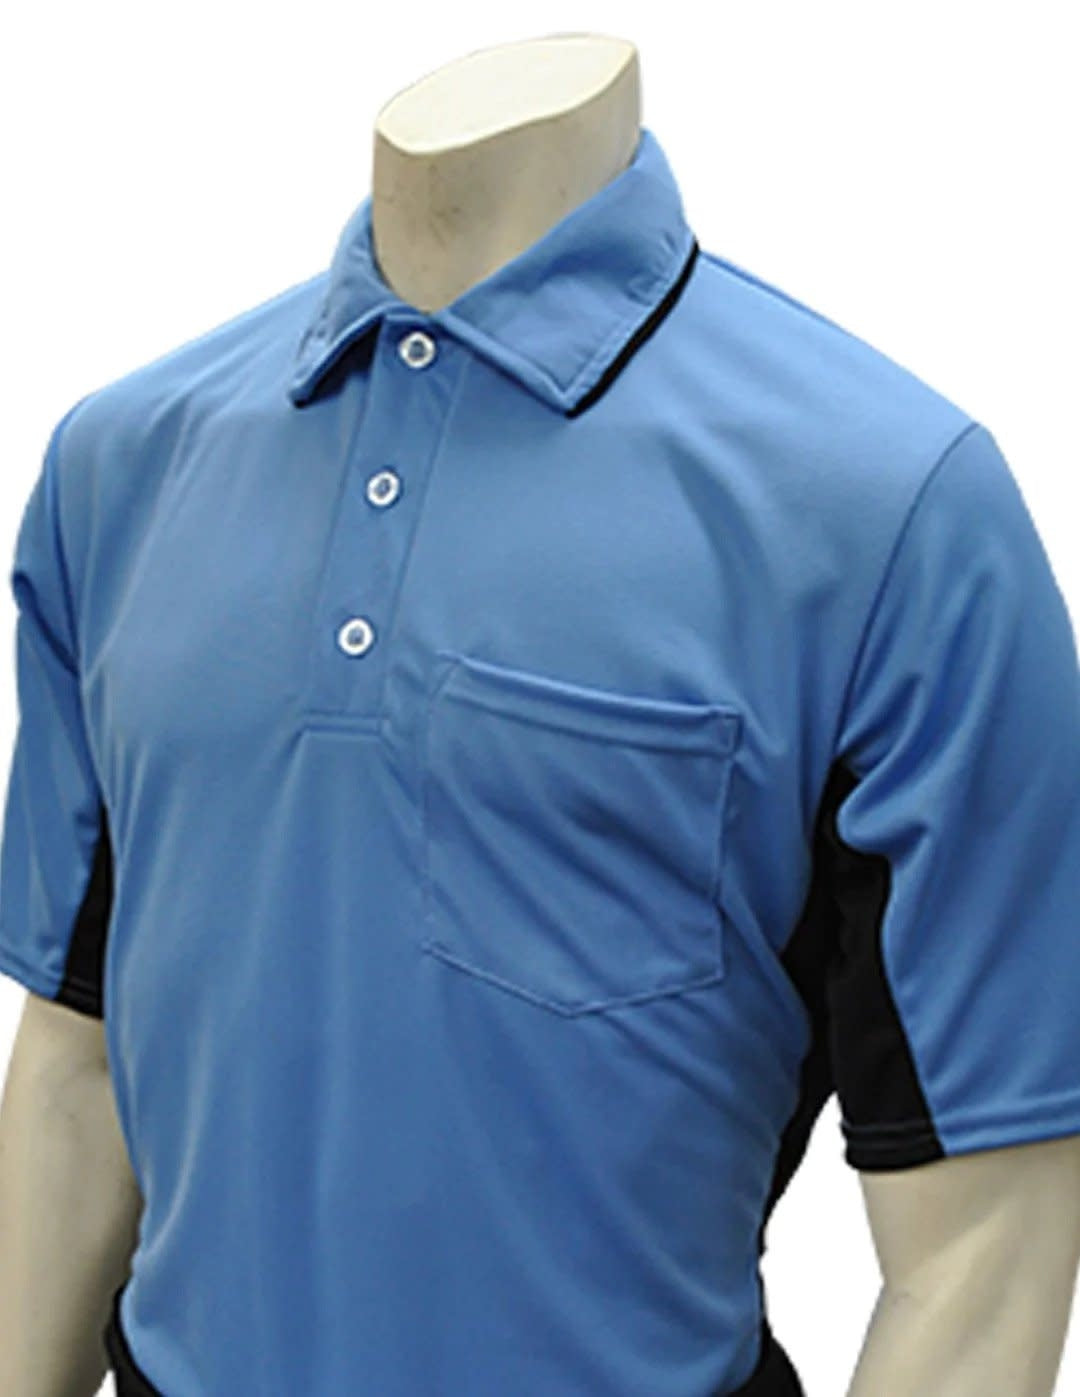 Smitty MLB Style Umpire Shirt with Side Panel